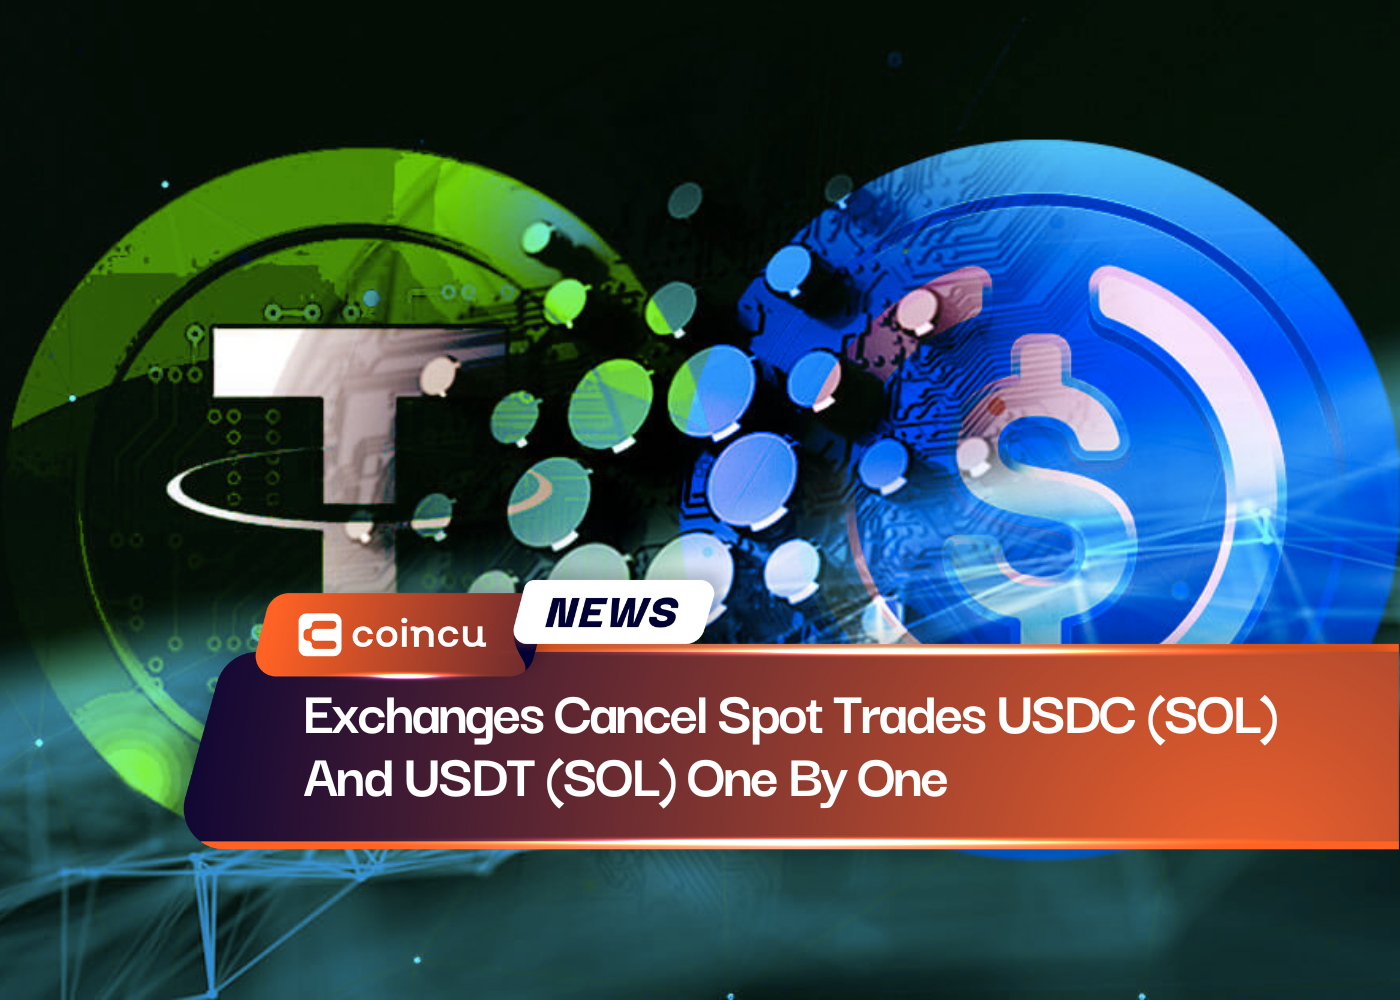 Exchanges Cancel Spot Trades USDC (SOL) And USDT (SOL) One By One